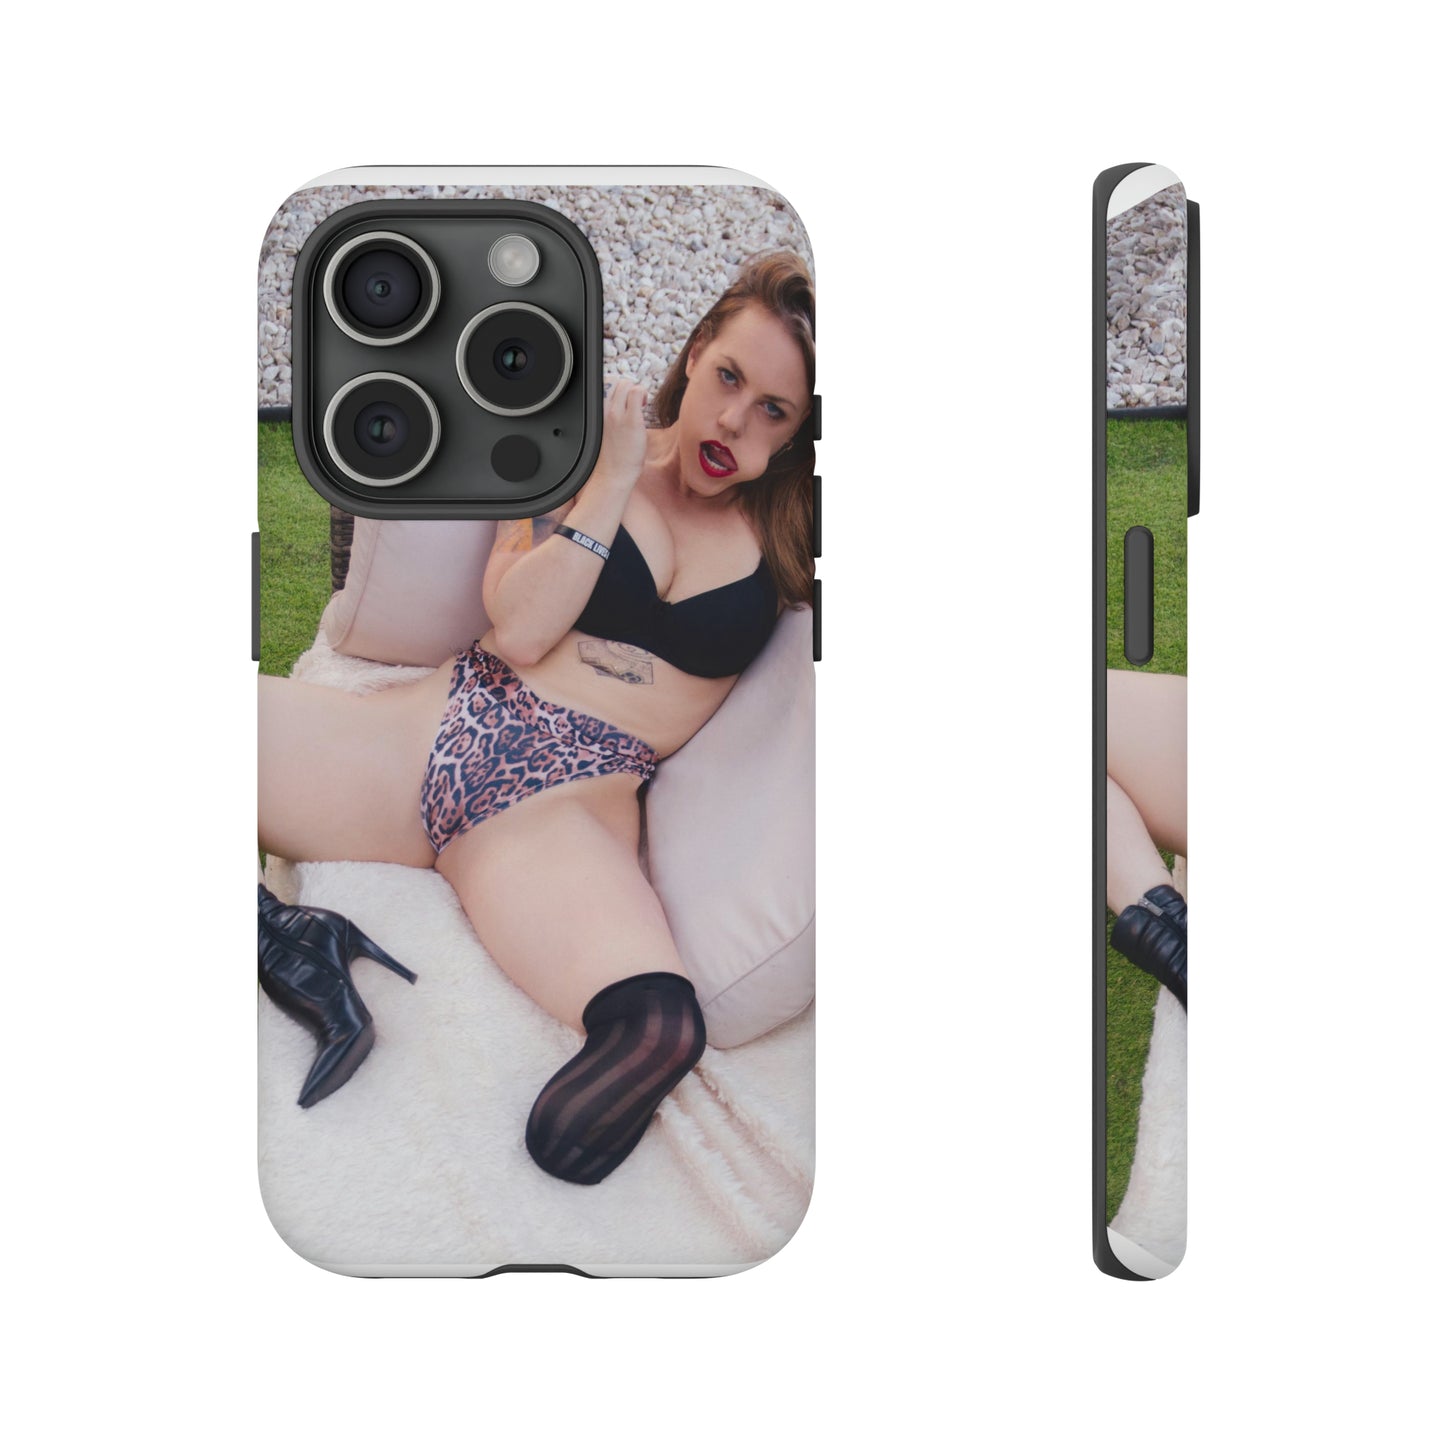 "AMD Tongue in Cheek" Phone Case for iPhone